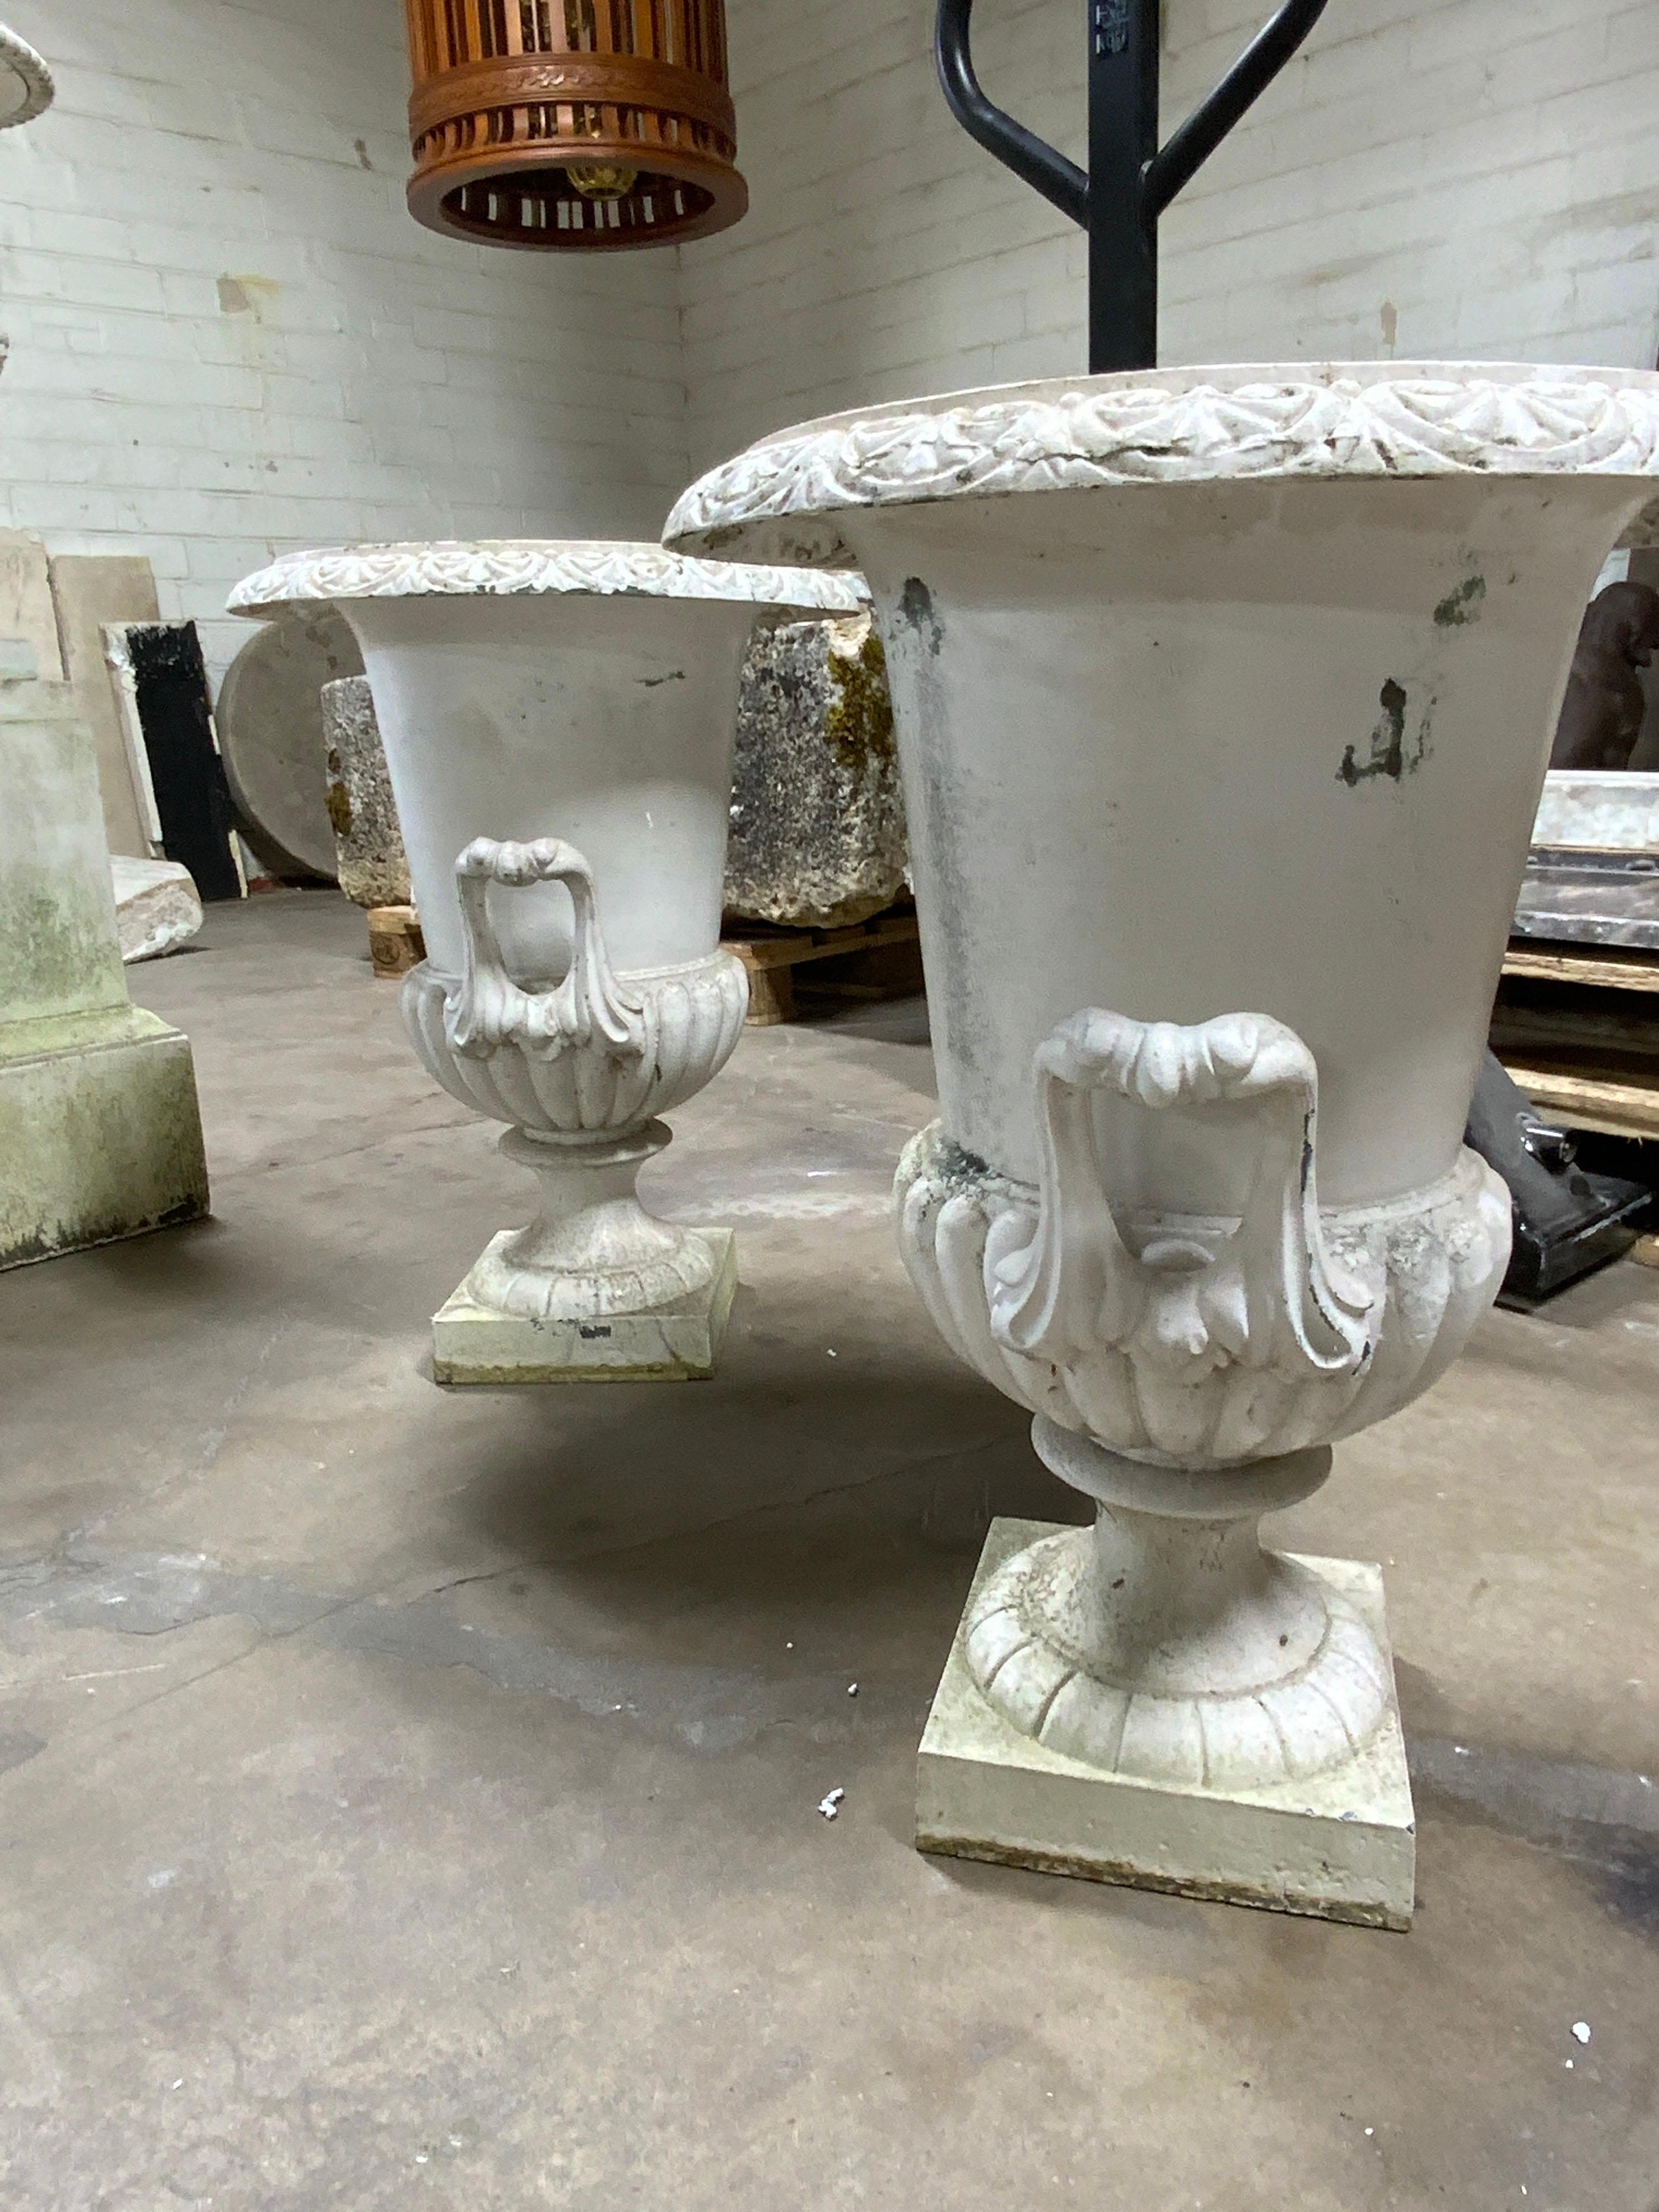 These beautiful urns originate from France. They are only sold as a set. Date back to the 1880s.